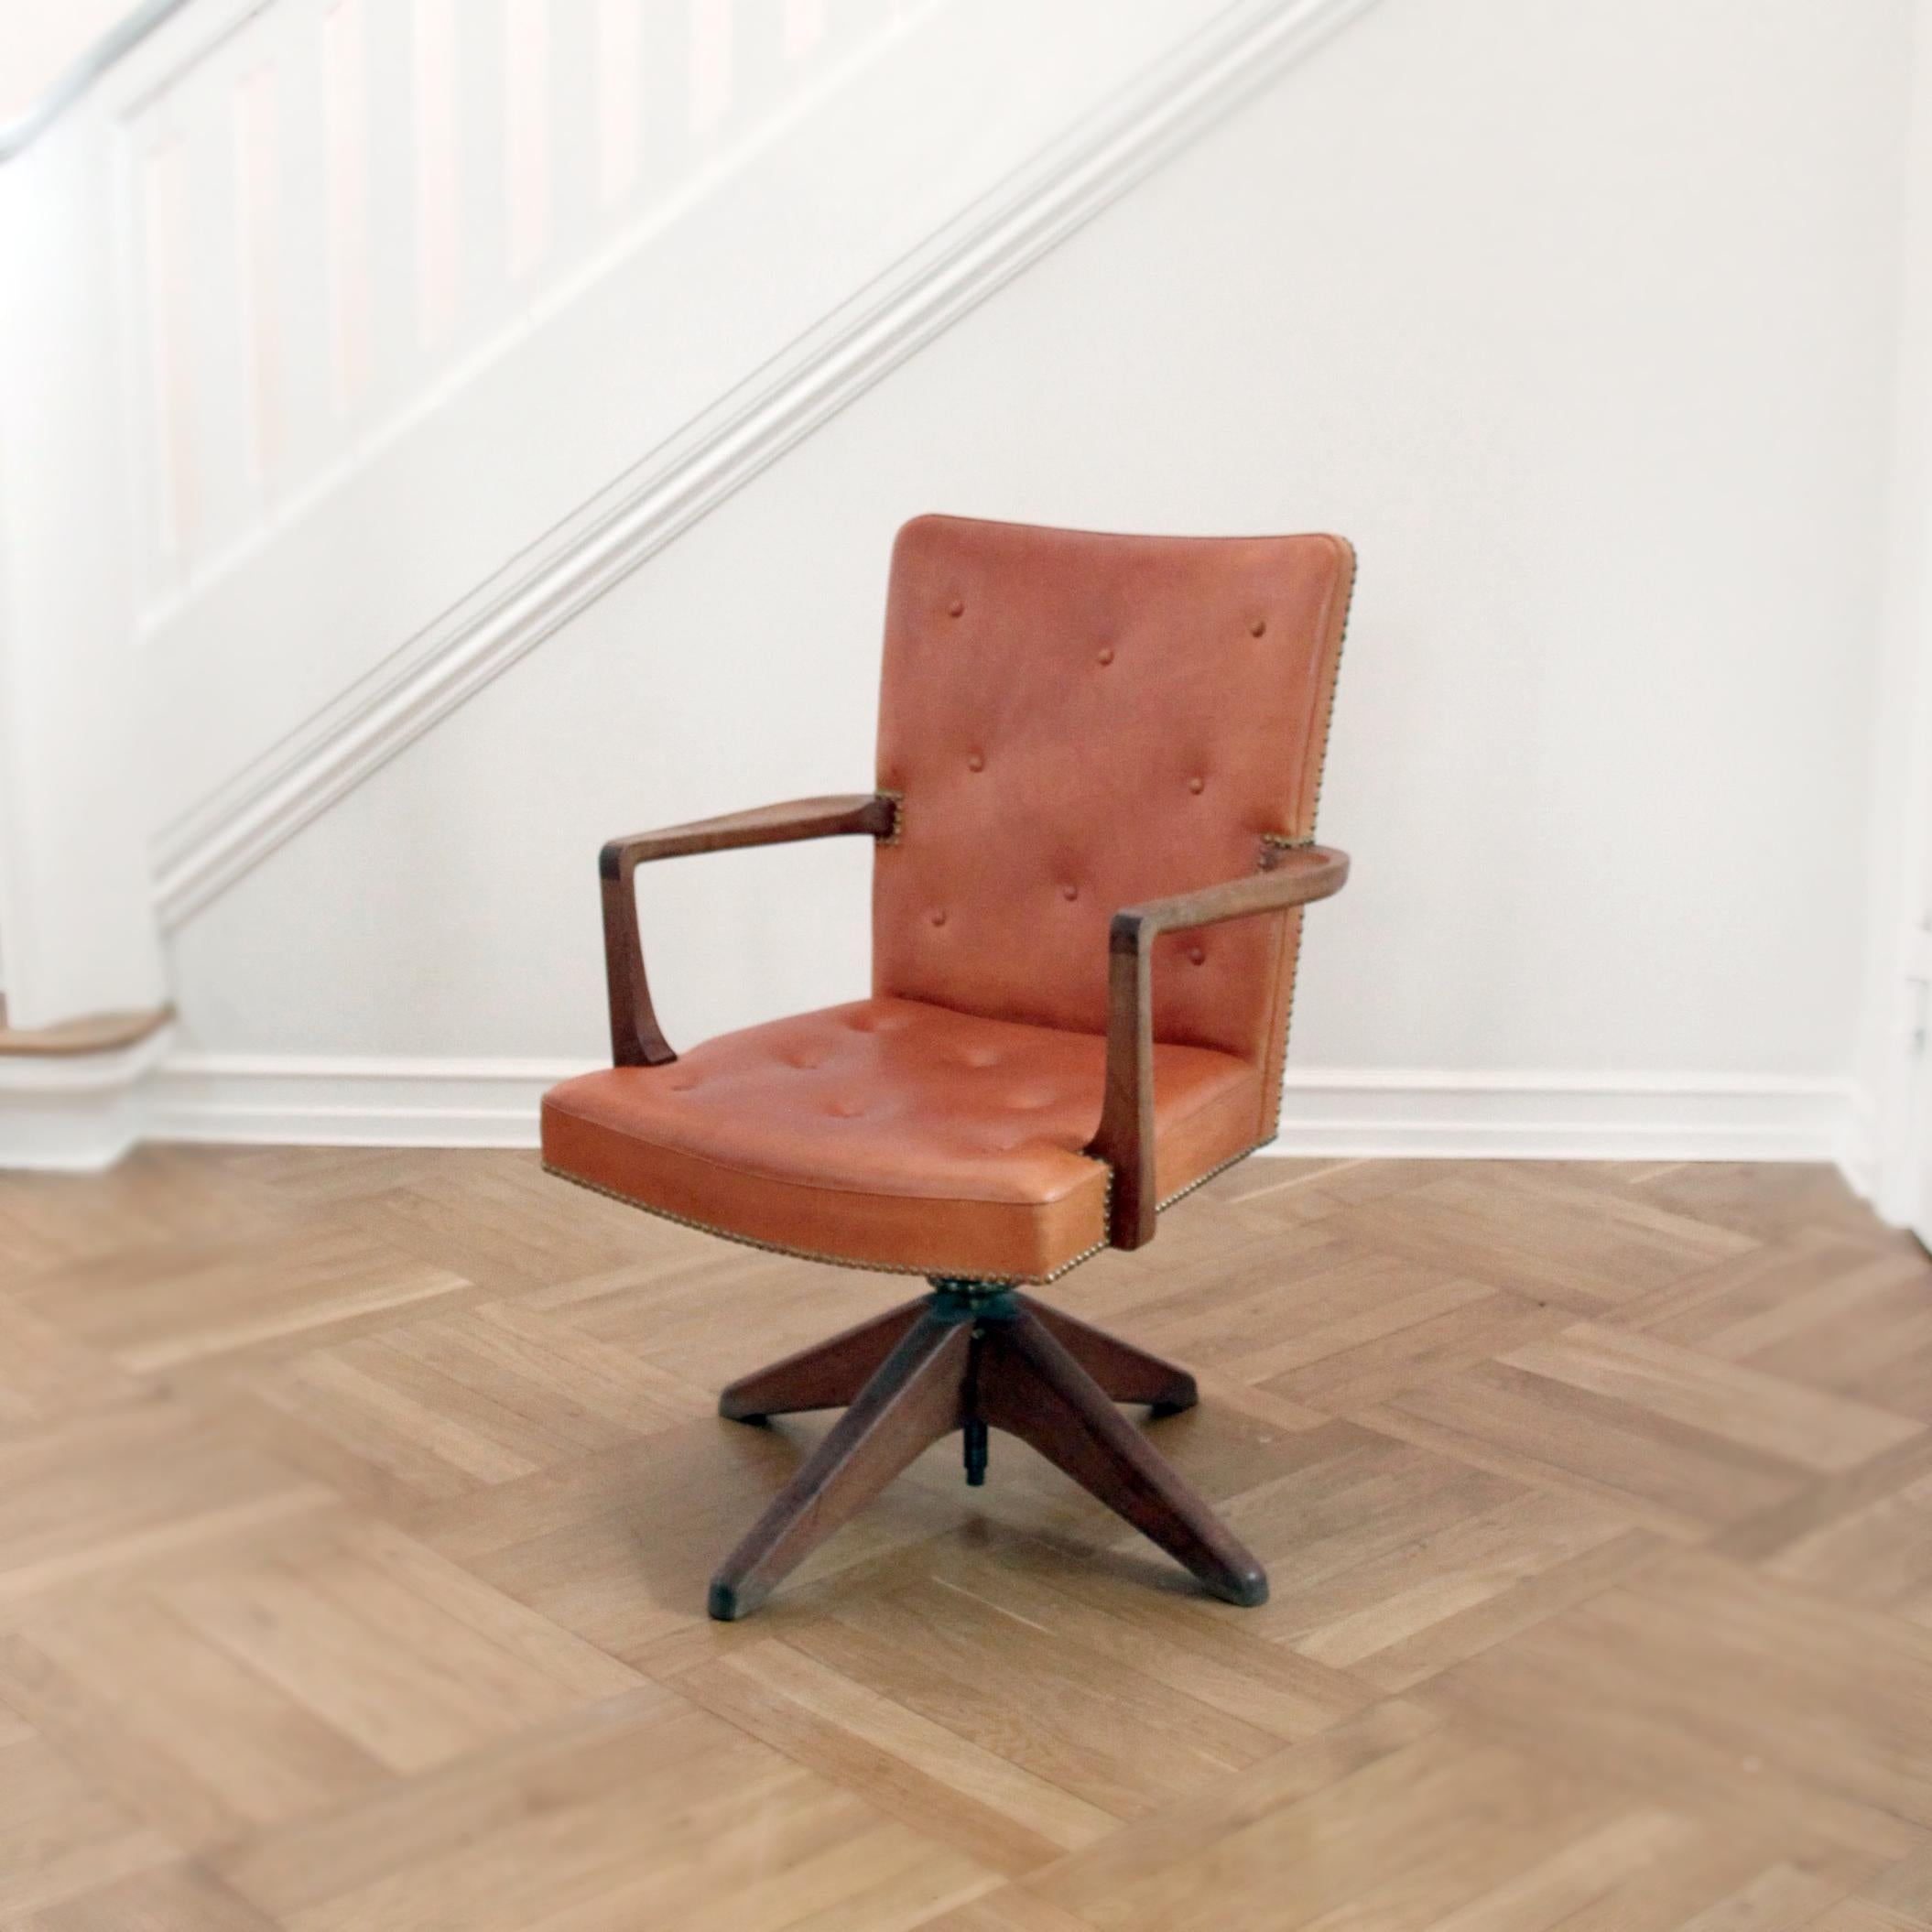 Palle Suenson & Jacob Kjær - Scandinavian Modern

A rare executive desk chair by Danish Modenist Architect Palle Suenson (1904-1987) and cabinetmaker Jacob Kjær (1896-1957) a special order for the executive offices in Burmeister & Wain in